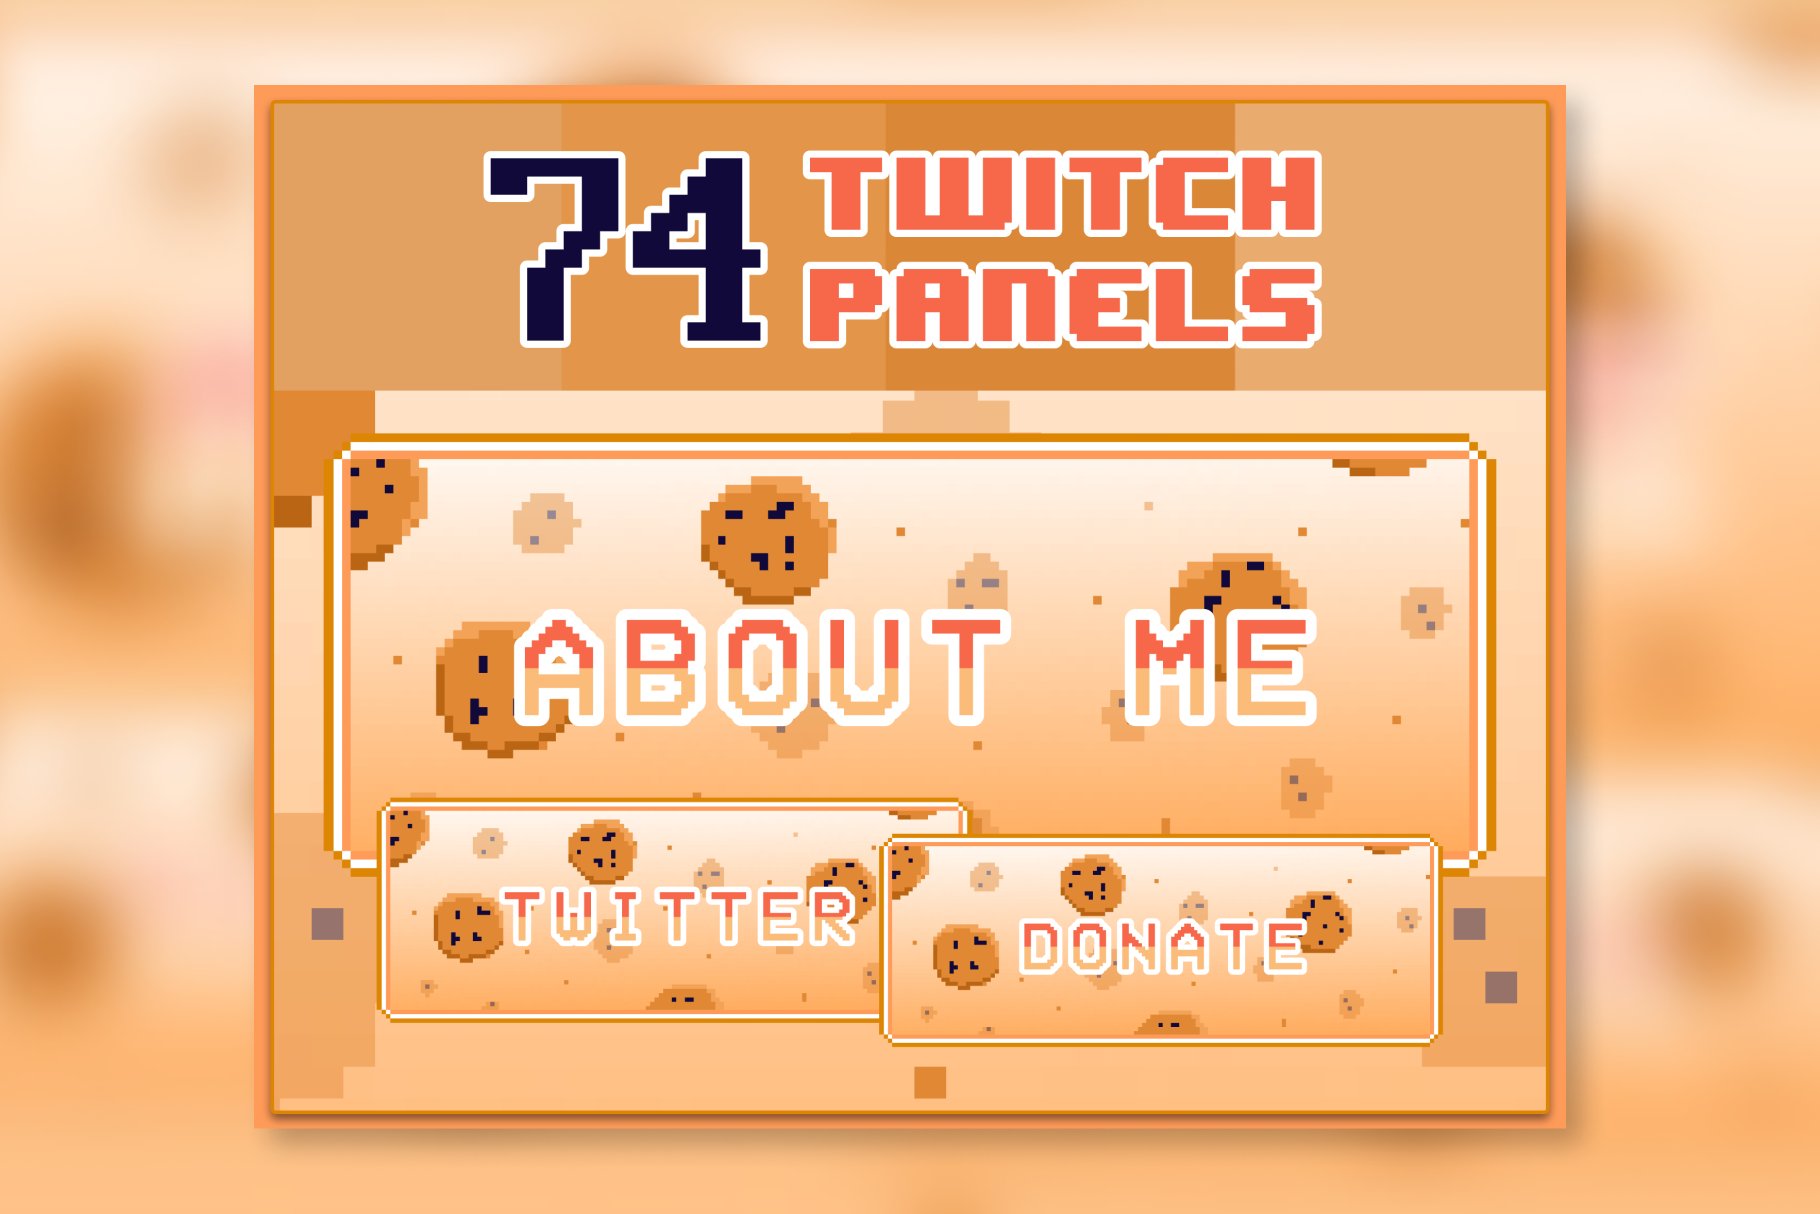 74x Cookies Pixel Panels for Twitch cover image.